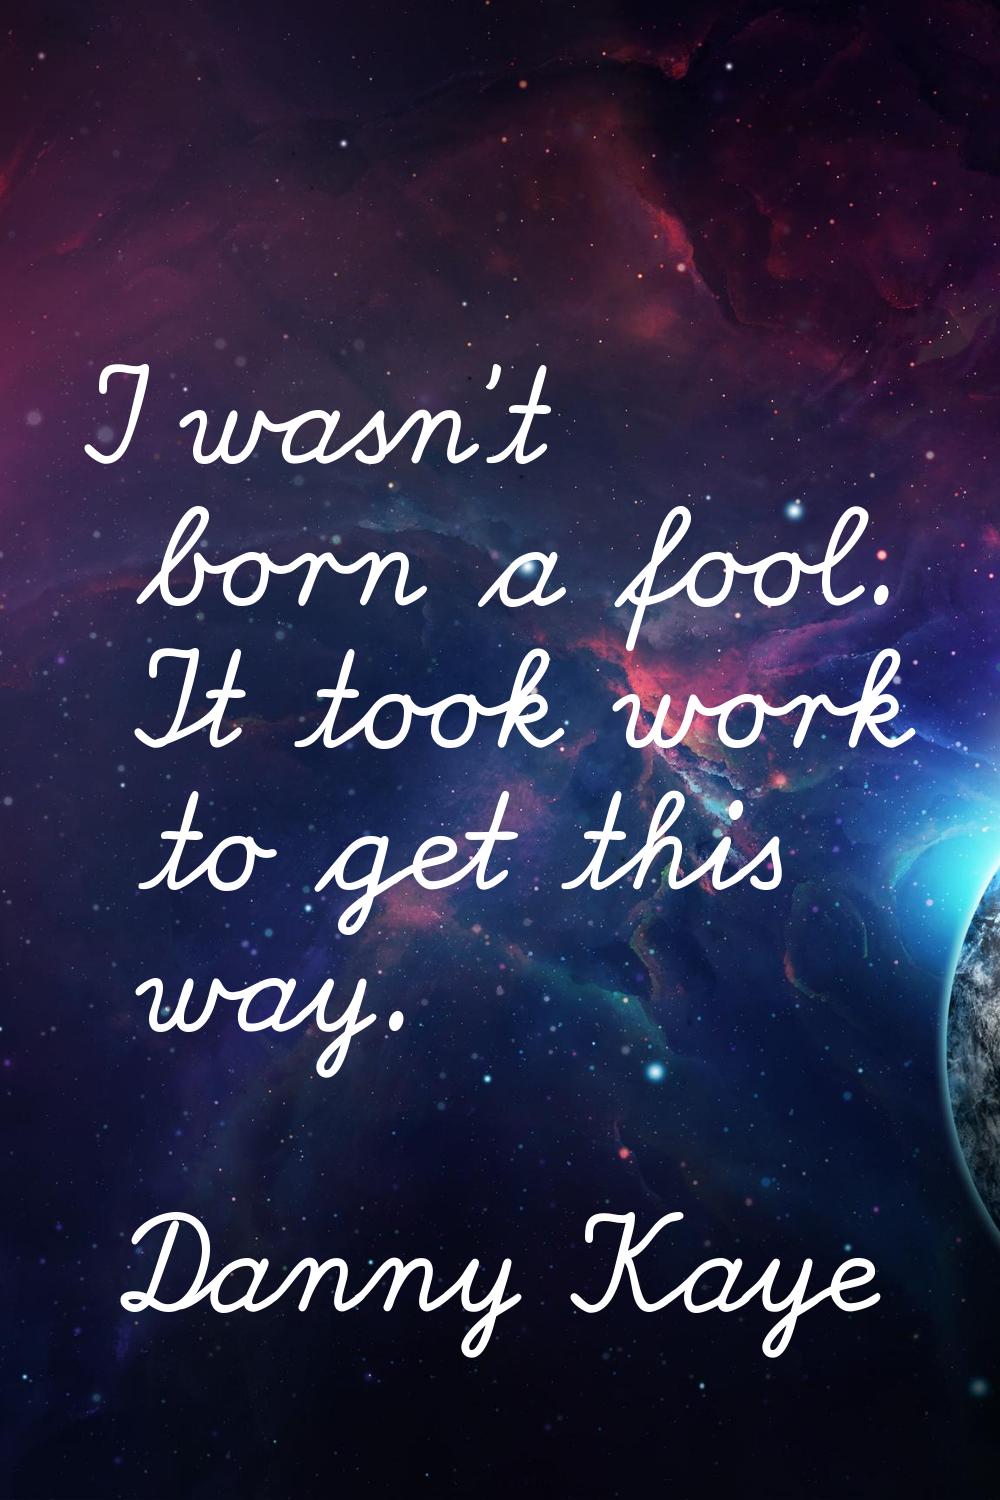 I wasn't born a fool. It took work to get this way.